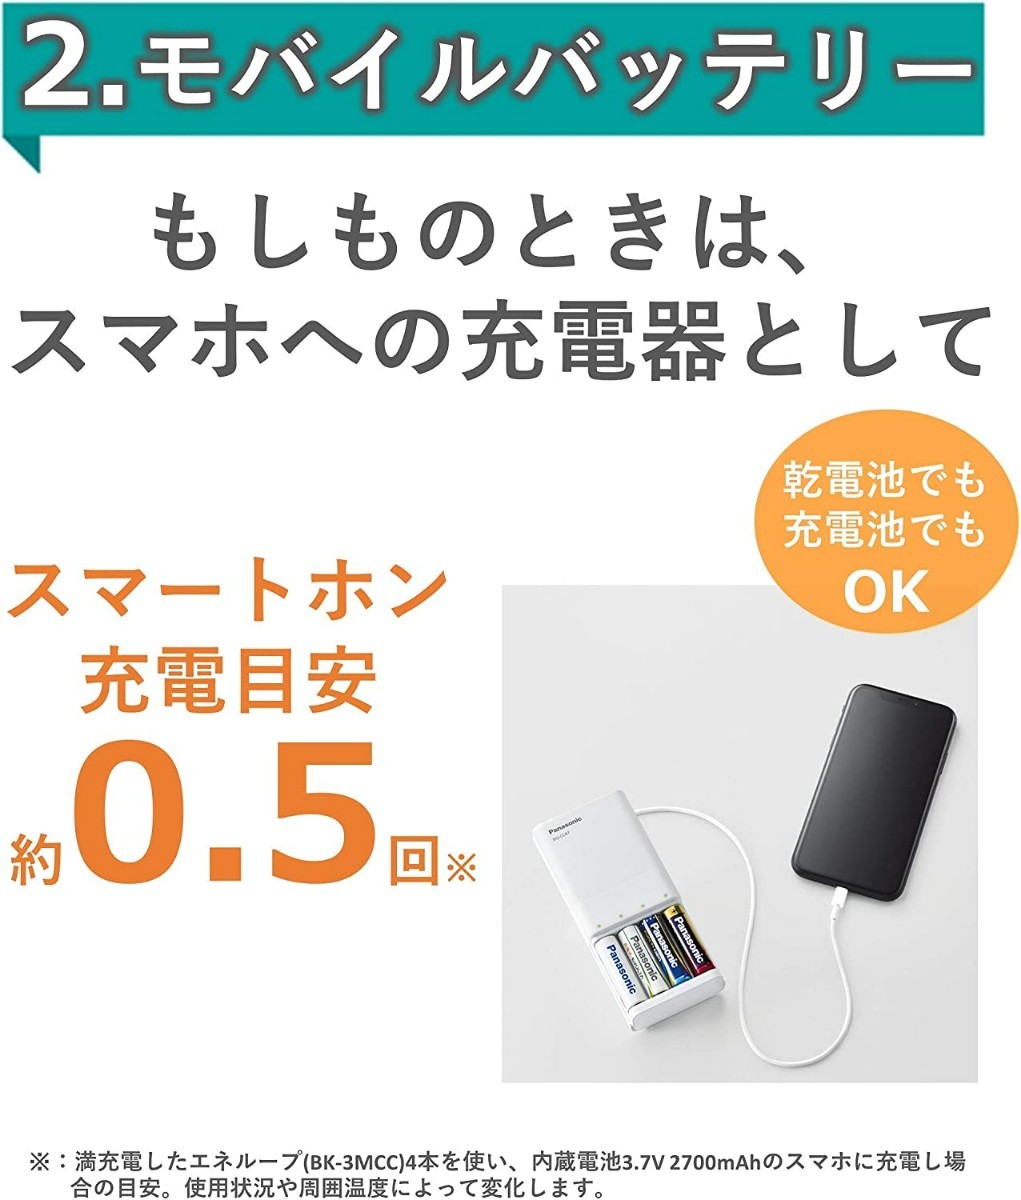  made in Japan Panasonic single 3 shape single 4 shape fast charger high capacity model most small capacity 2500mAh Eneloop rechargeable battery USB charger single 3 single 4 USB white 